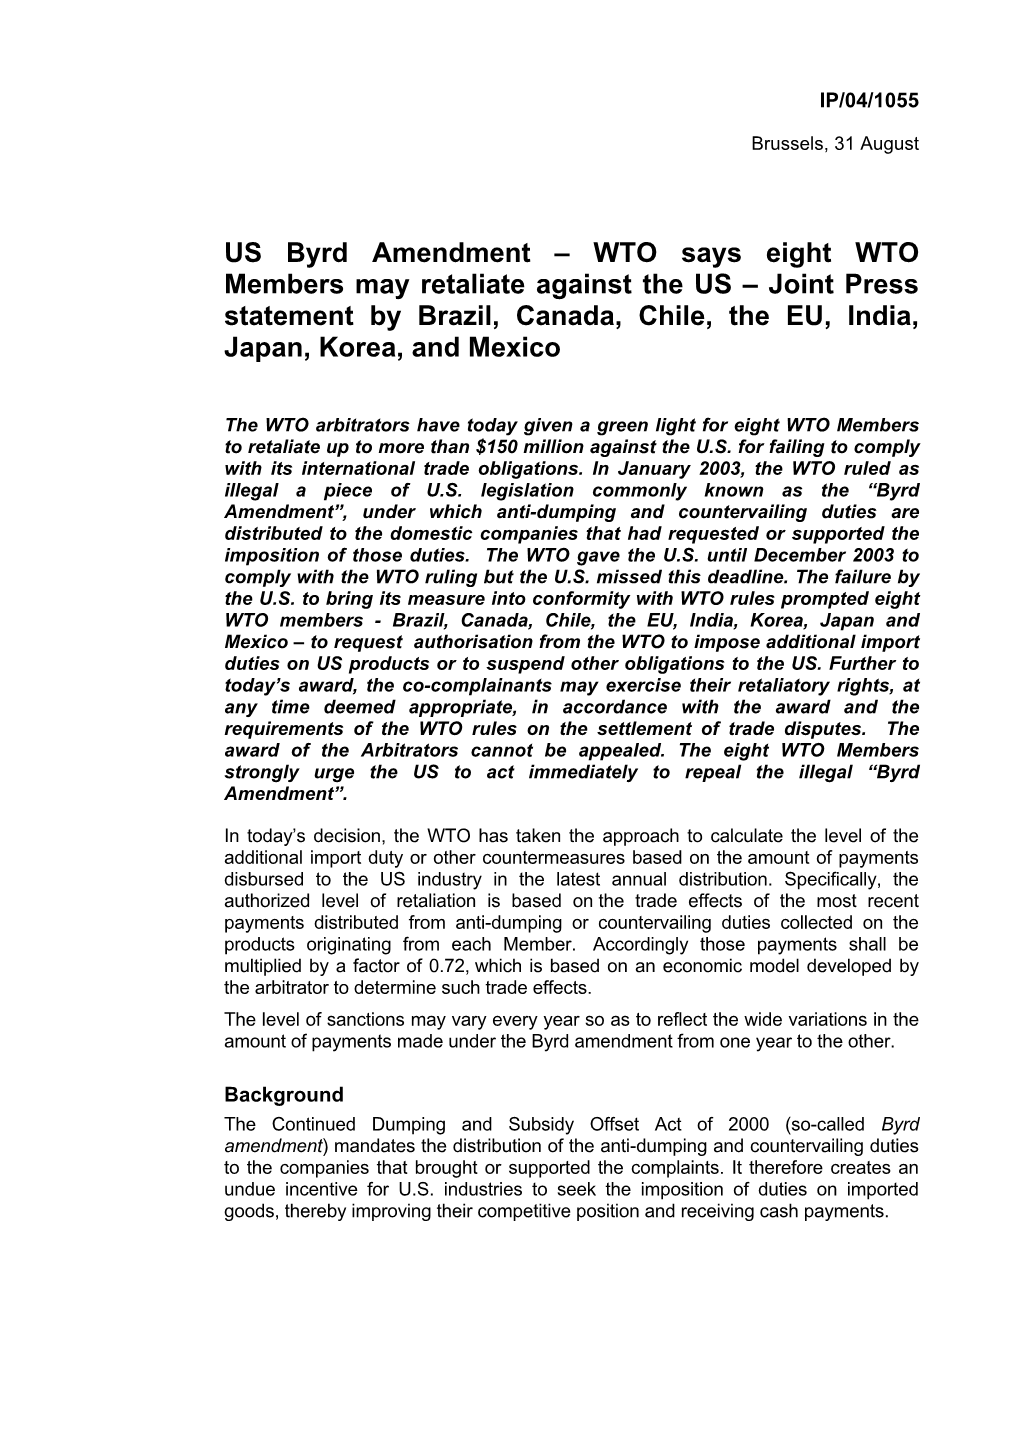 US Byrd Amendment – WTO Says Eight WTO Members May Retaliate Against the US – Joint Press Statement by Brazil, Canada, Chile, the EU, India, Japan, Korea, and Mexico